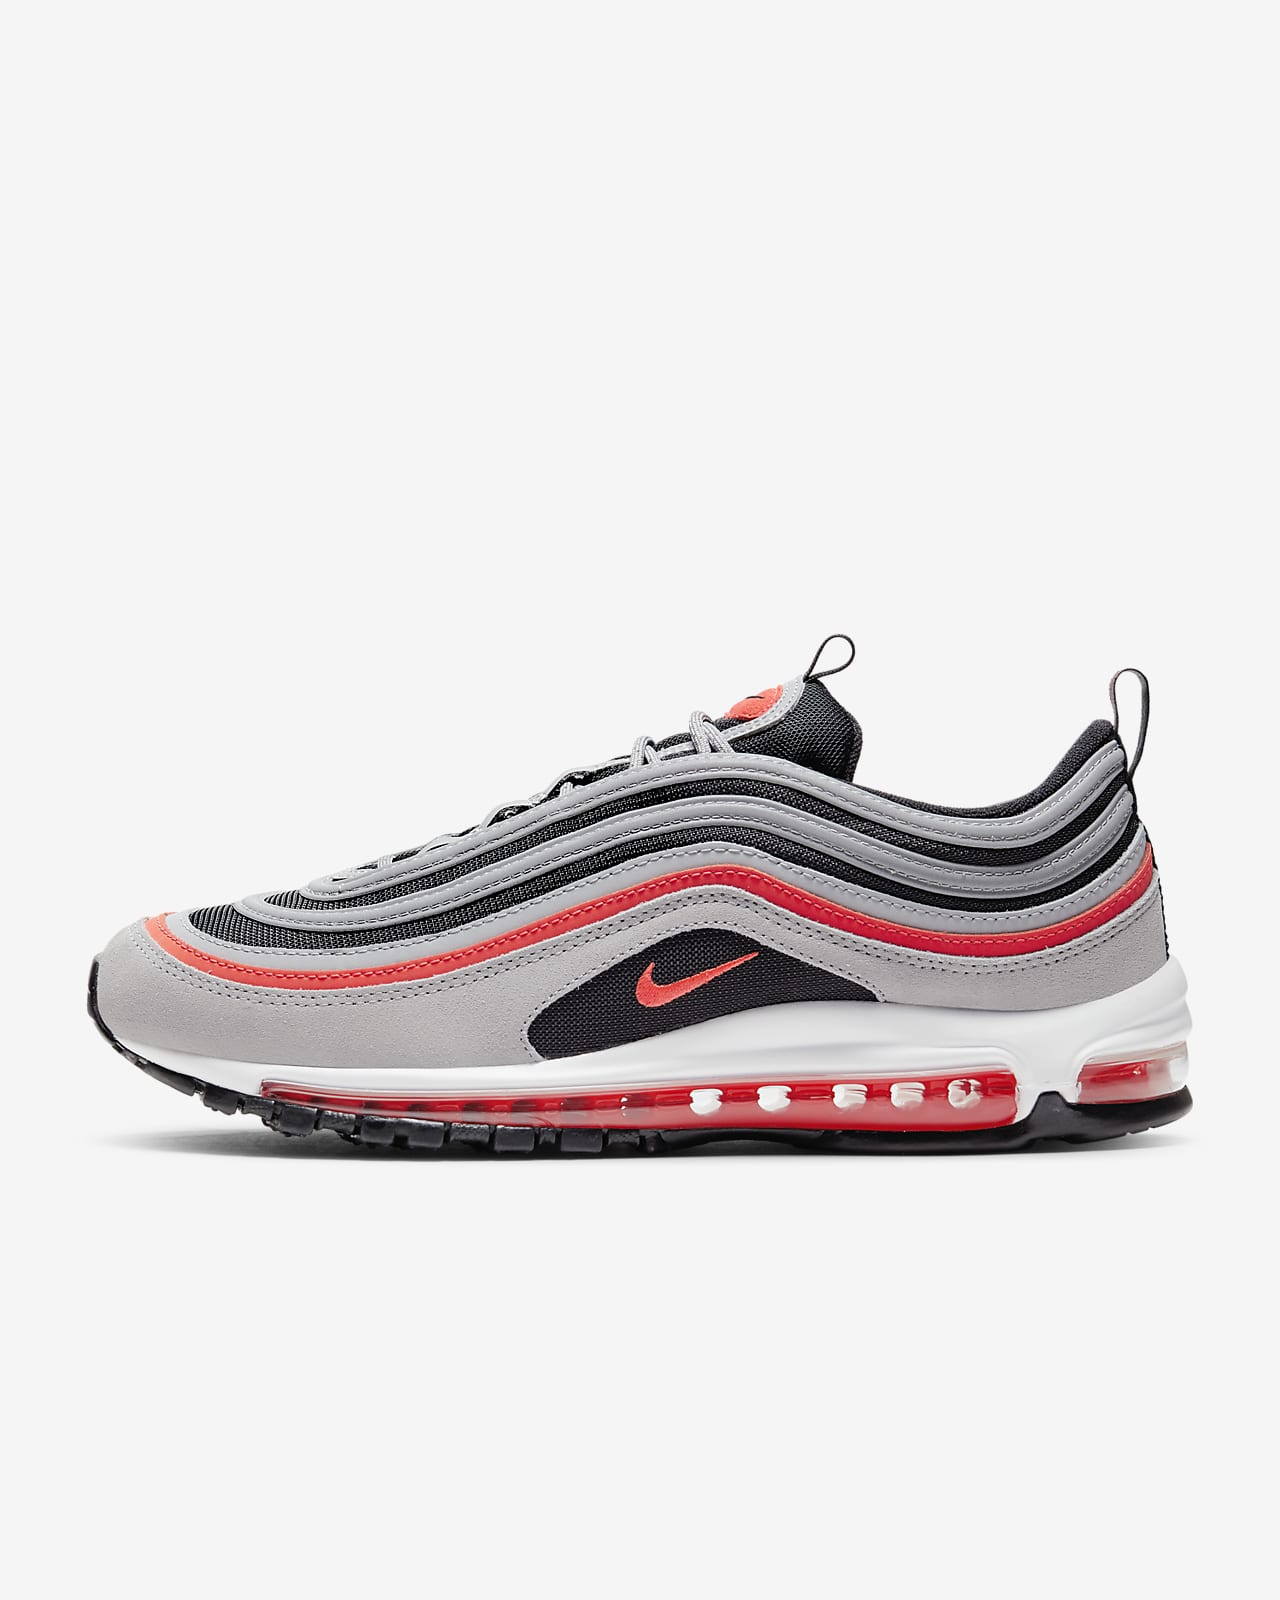 Soldes > nike chaussure air max 97 > en stock